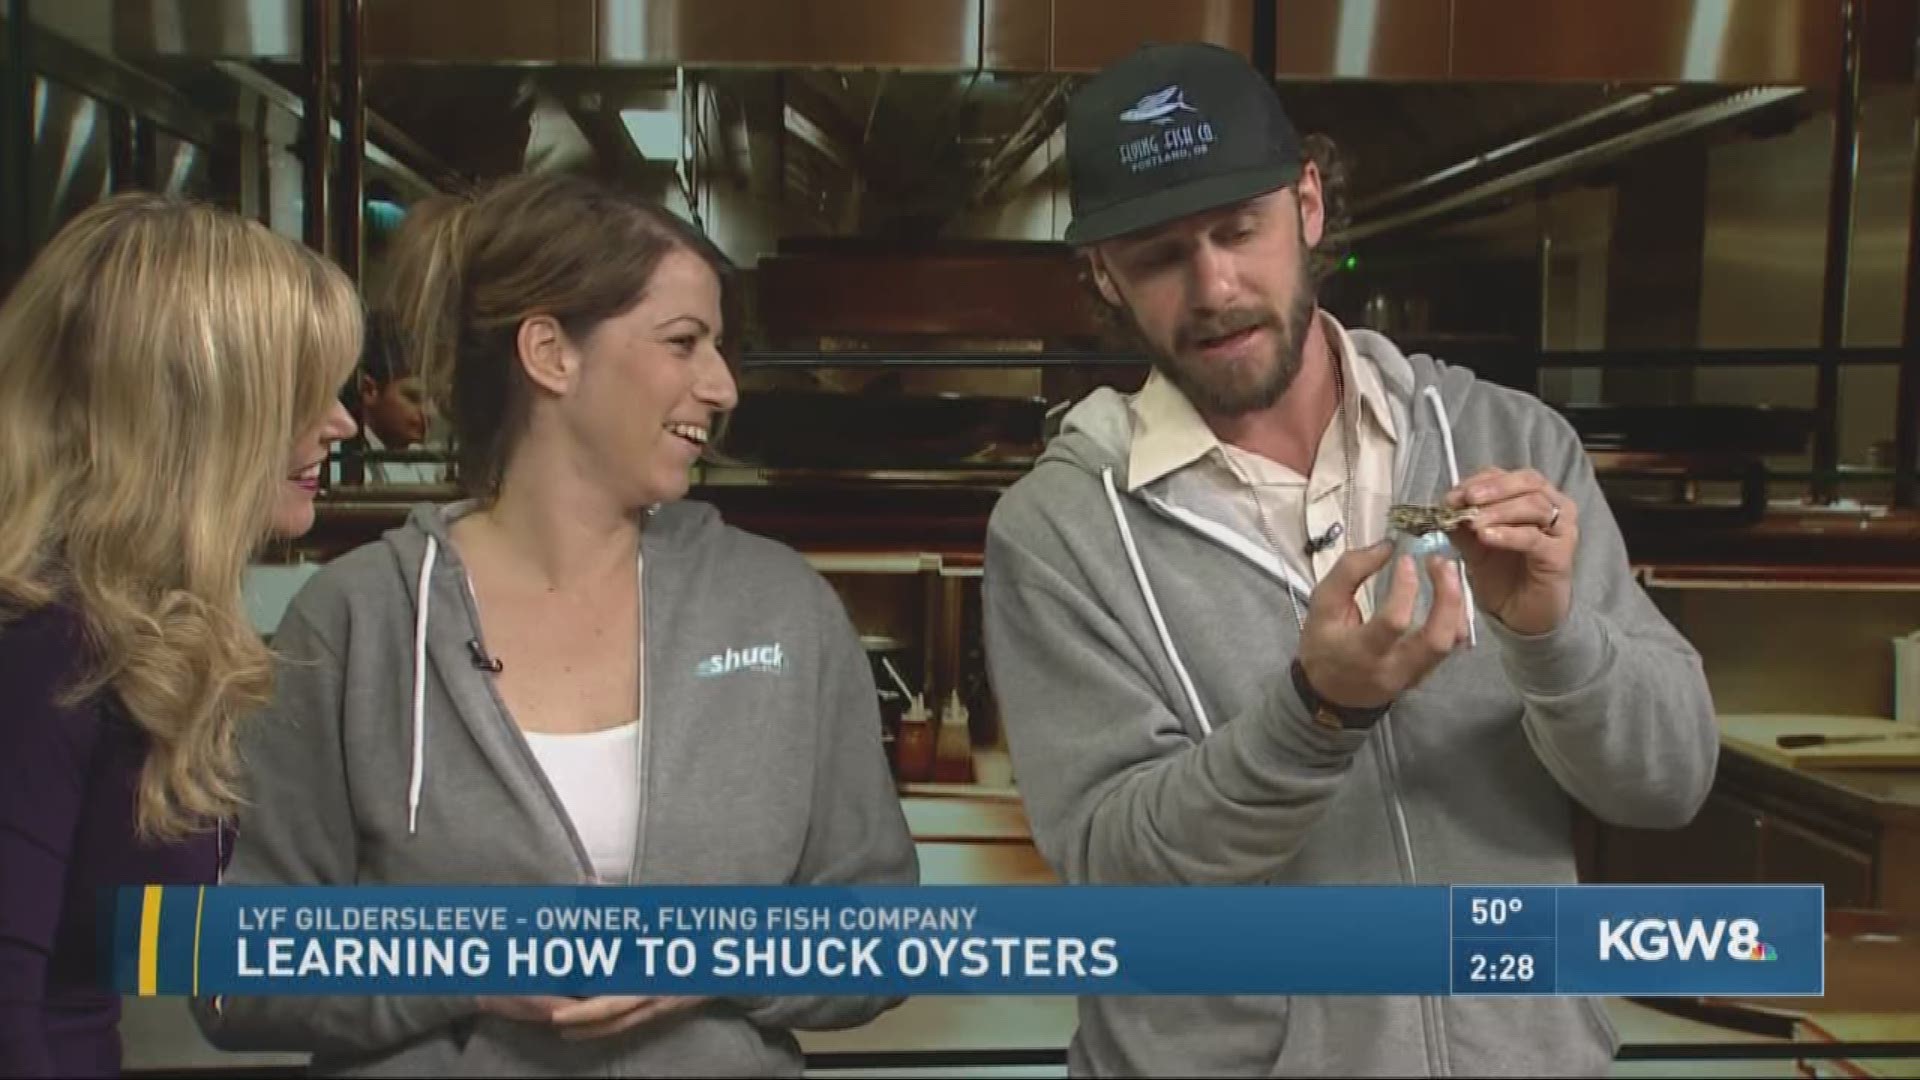 Learning how to shuck oysters